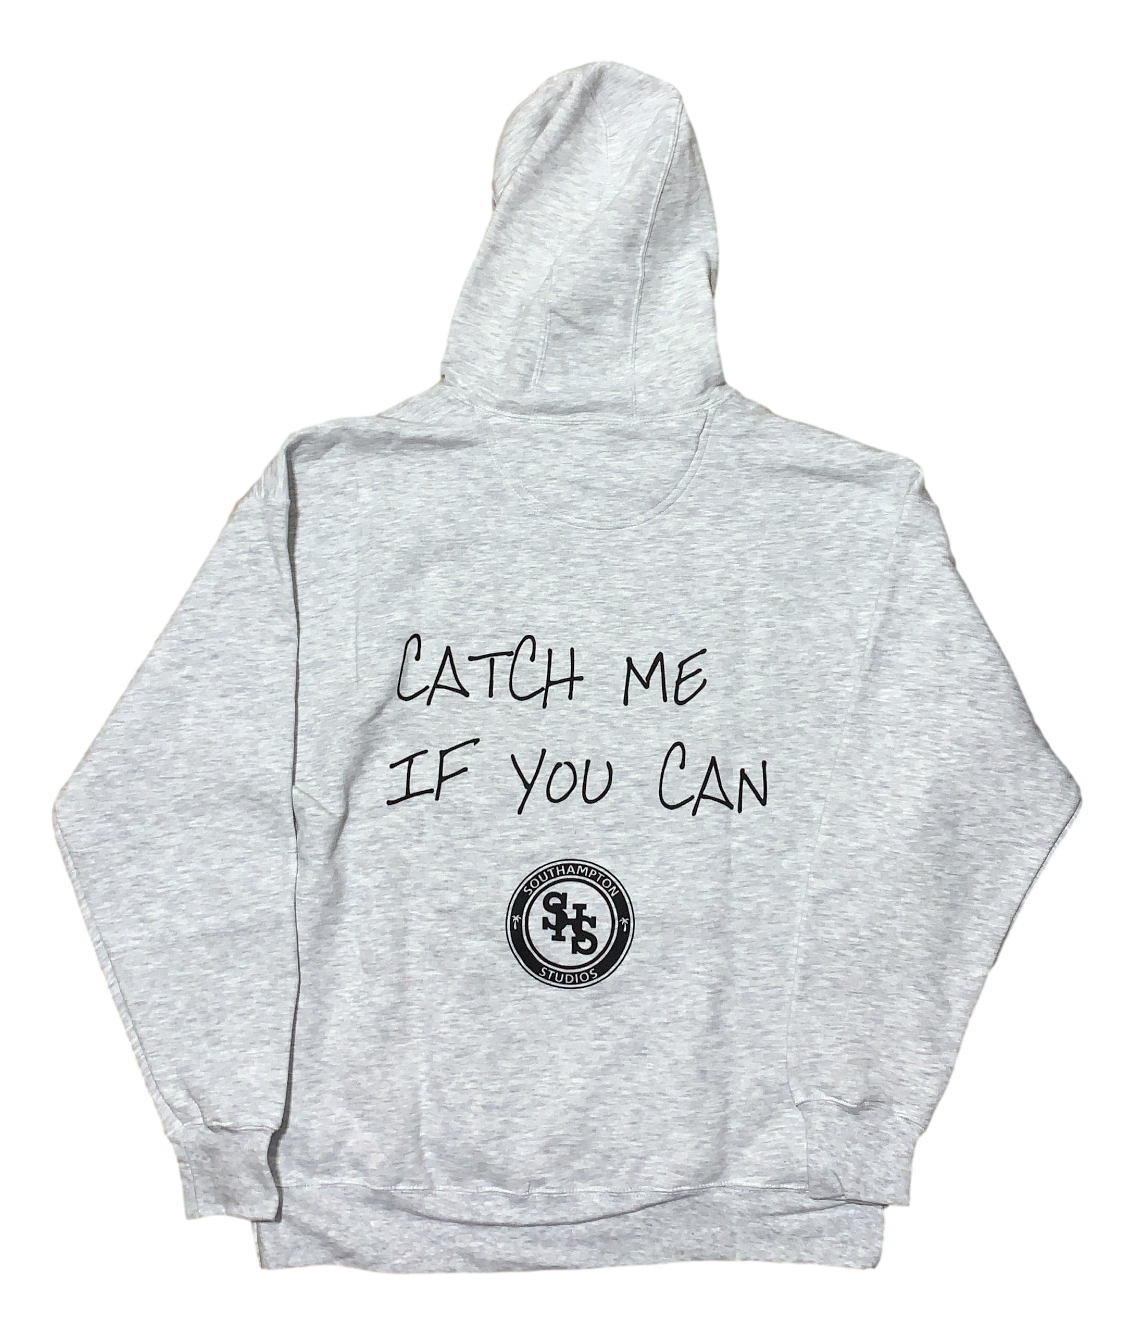 Catch Me If You Can Hoodie - Ash